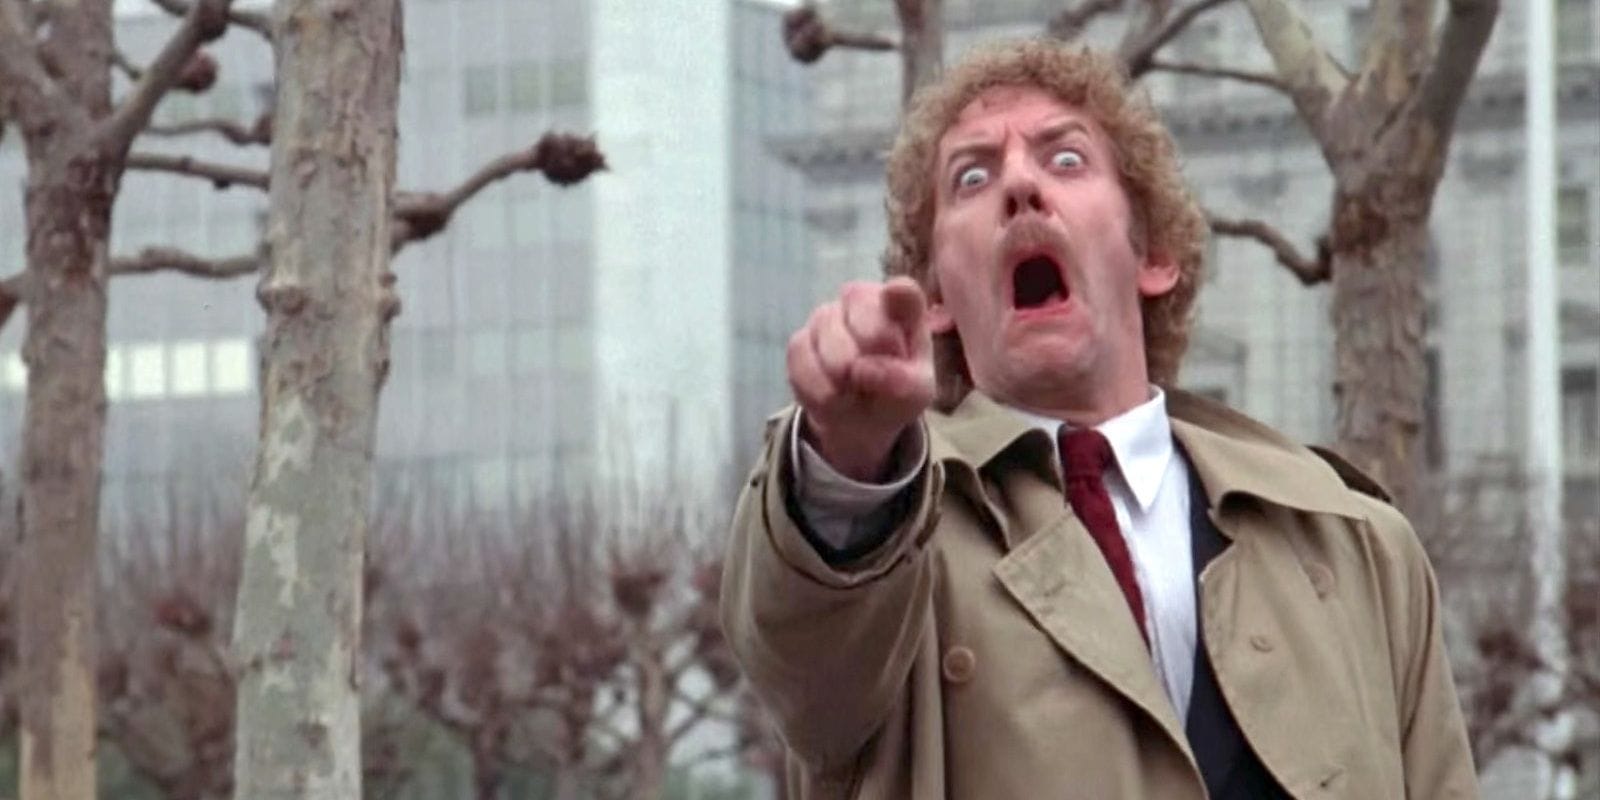 Donald Sutherland Dies at 88 After Six Decades of Iconic Film Roles